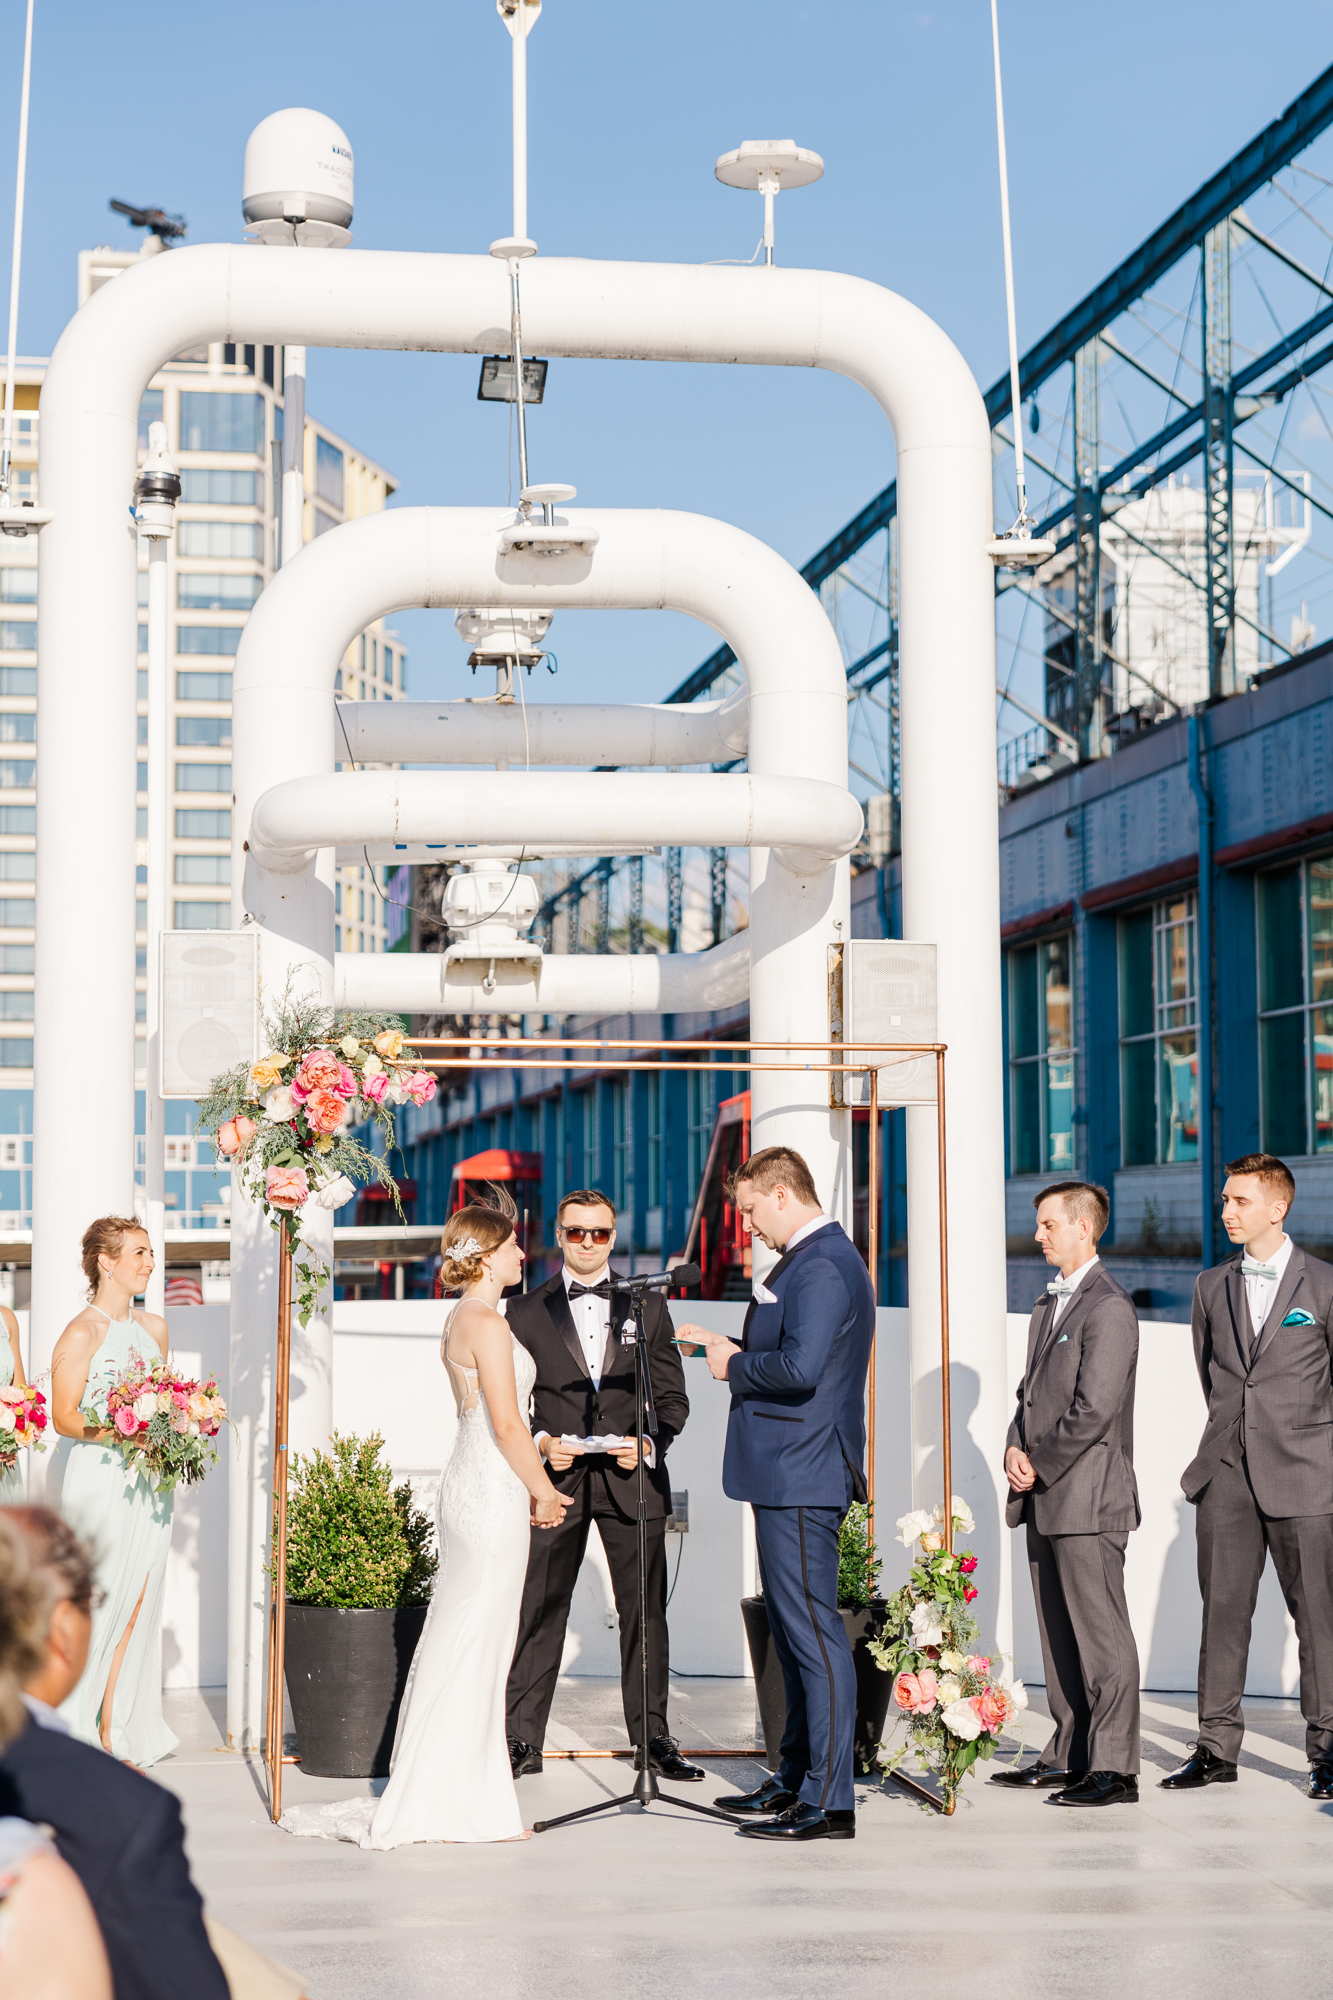 Beautiful Wedding Photography in New York City on a Boat